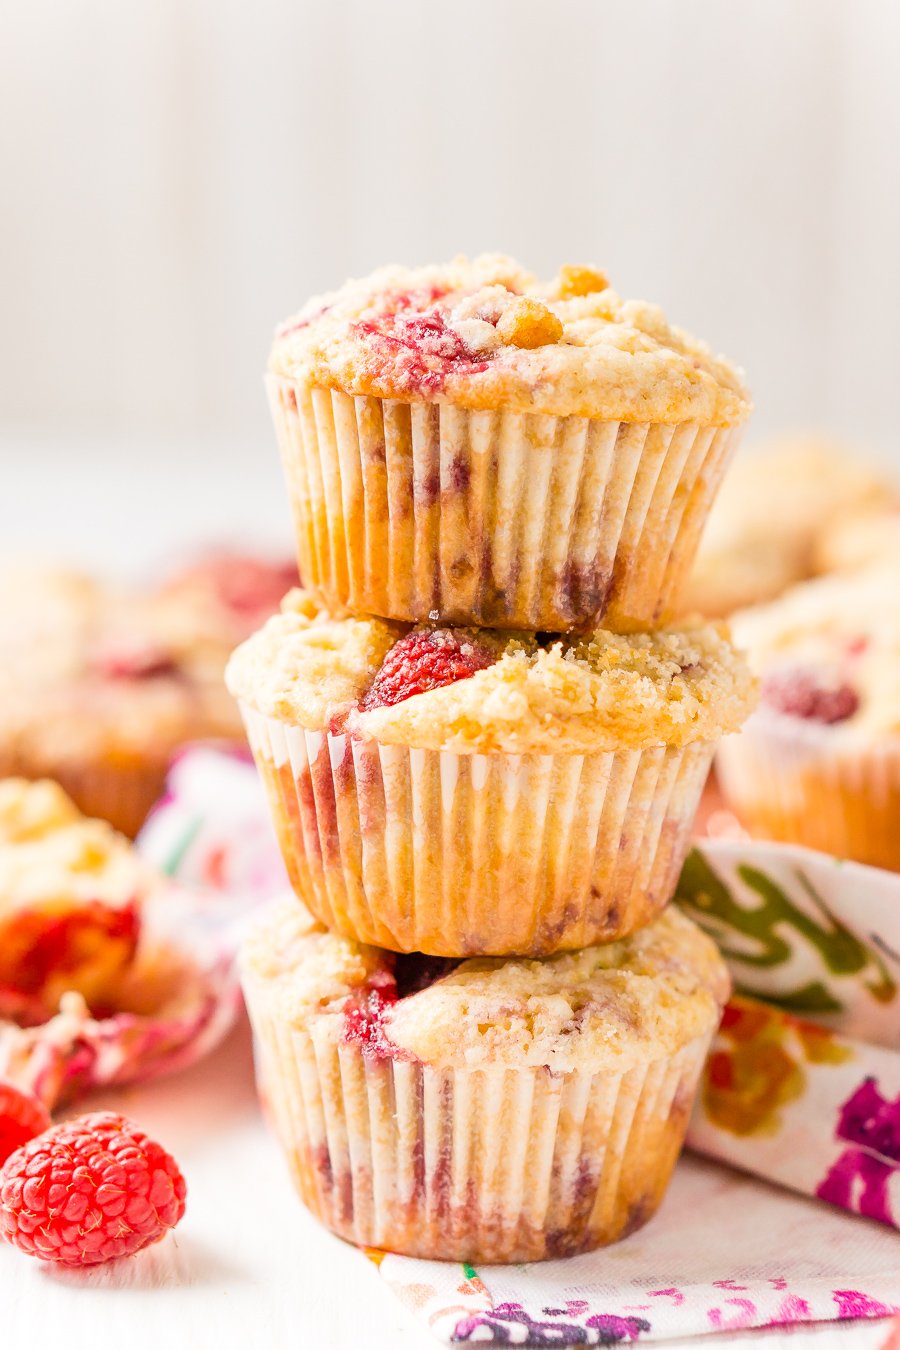 Raspberry Muffins loaded with juicy red raspberries and topped with an irresistible sugar crumble.